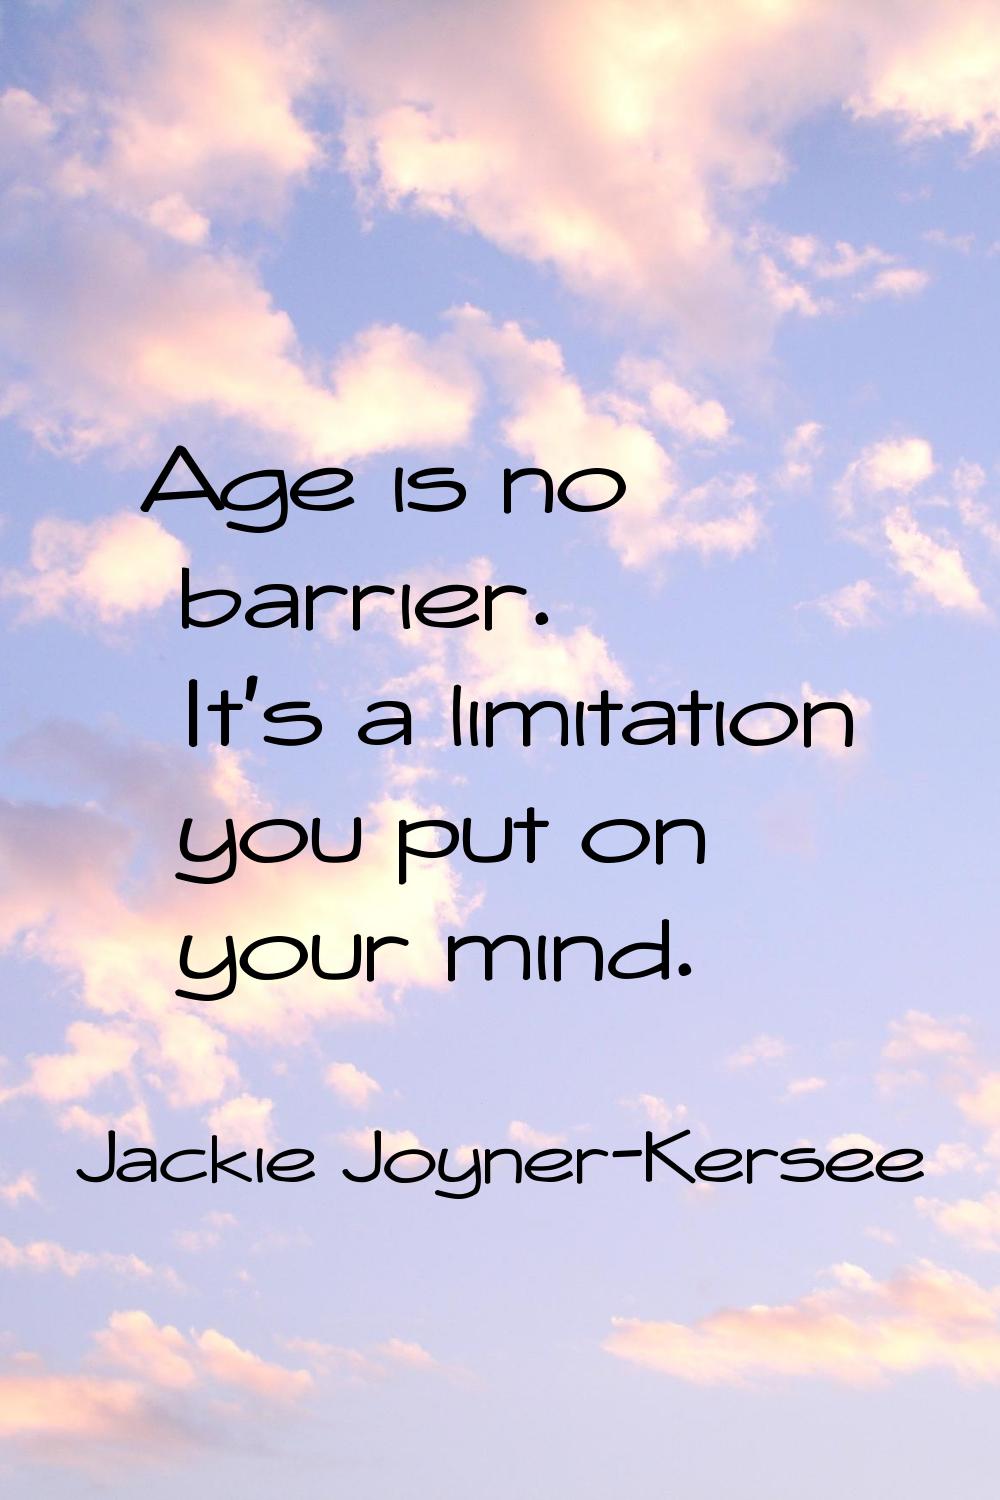 Age is no barrier. It's a limitation you put on your mind.